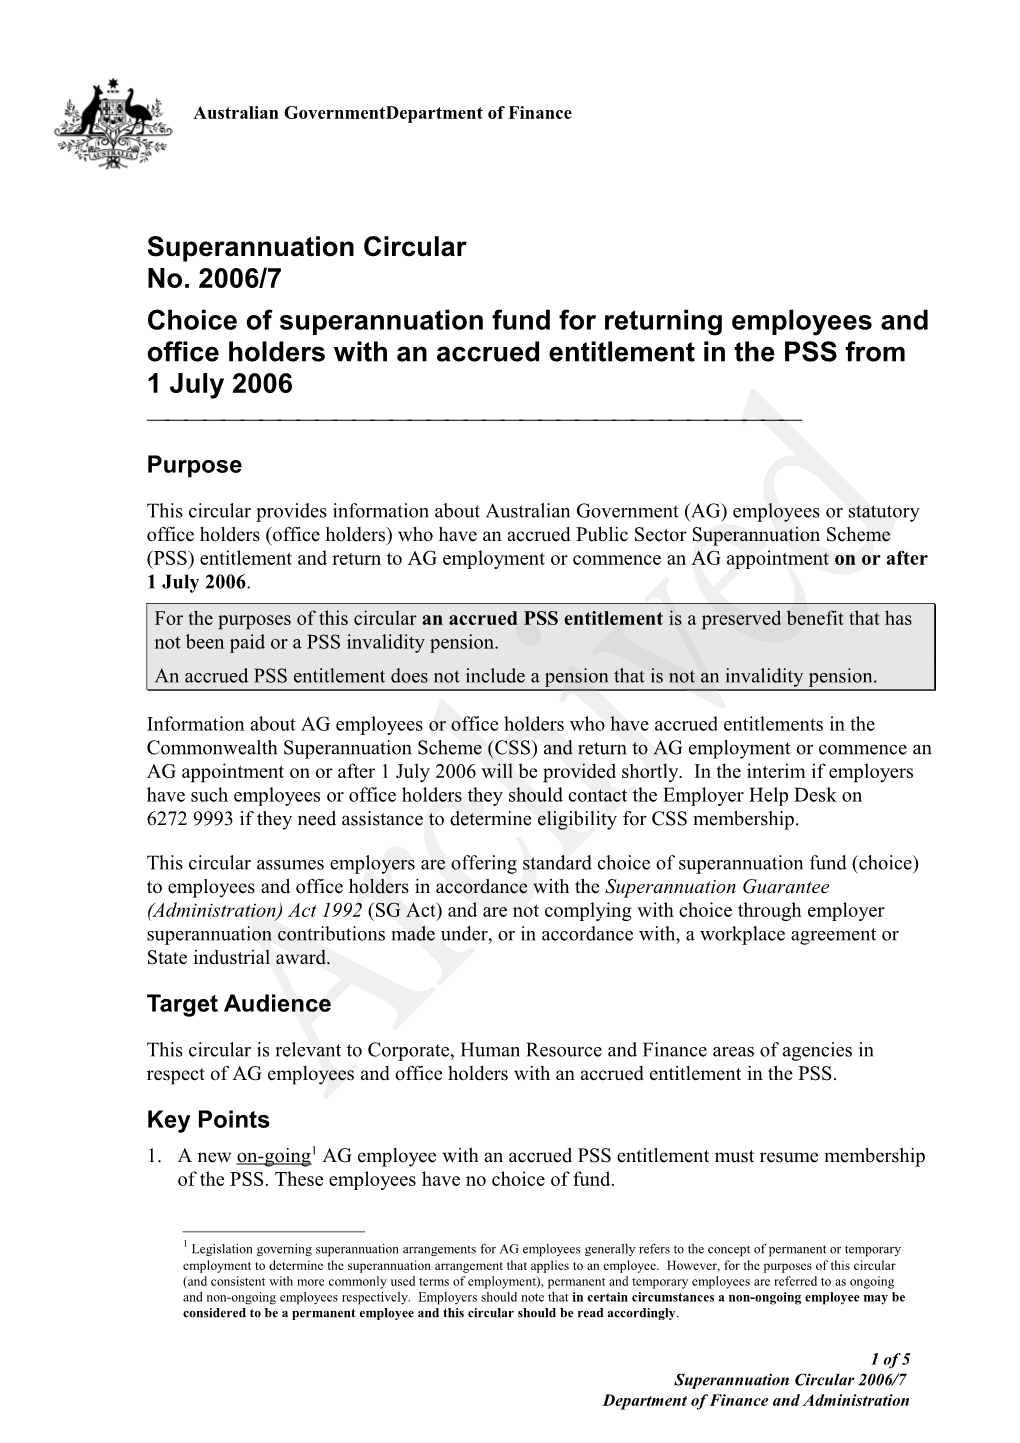 Superannuation Circular No. 2006/7 - Choice of Superannuation Fund for Returning Employees